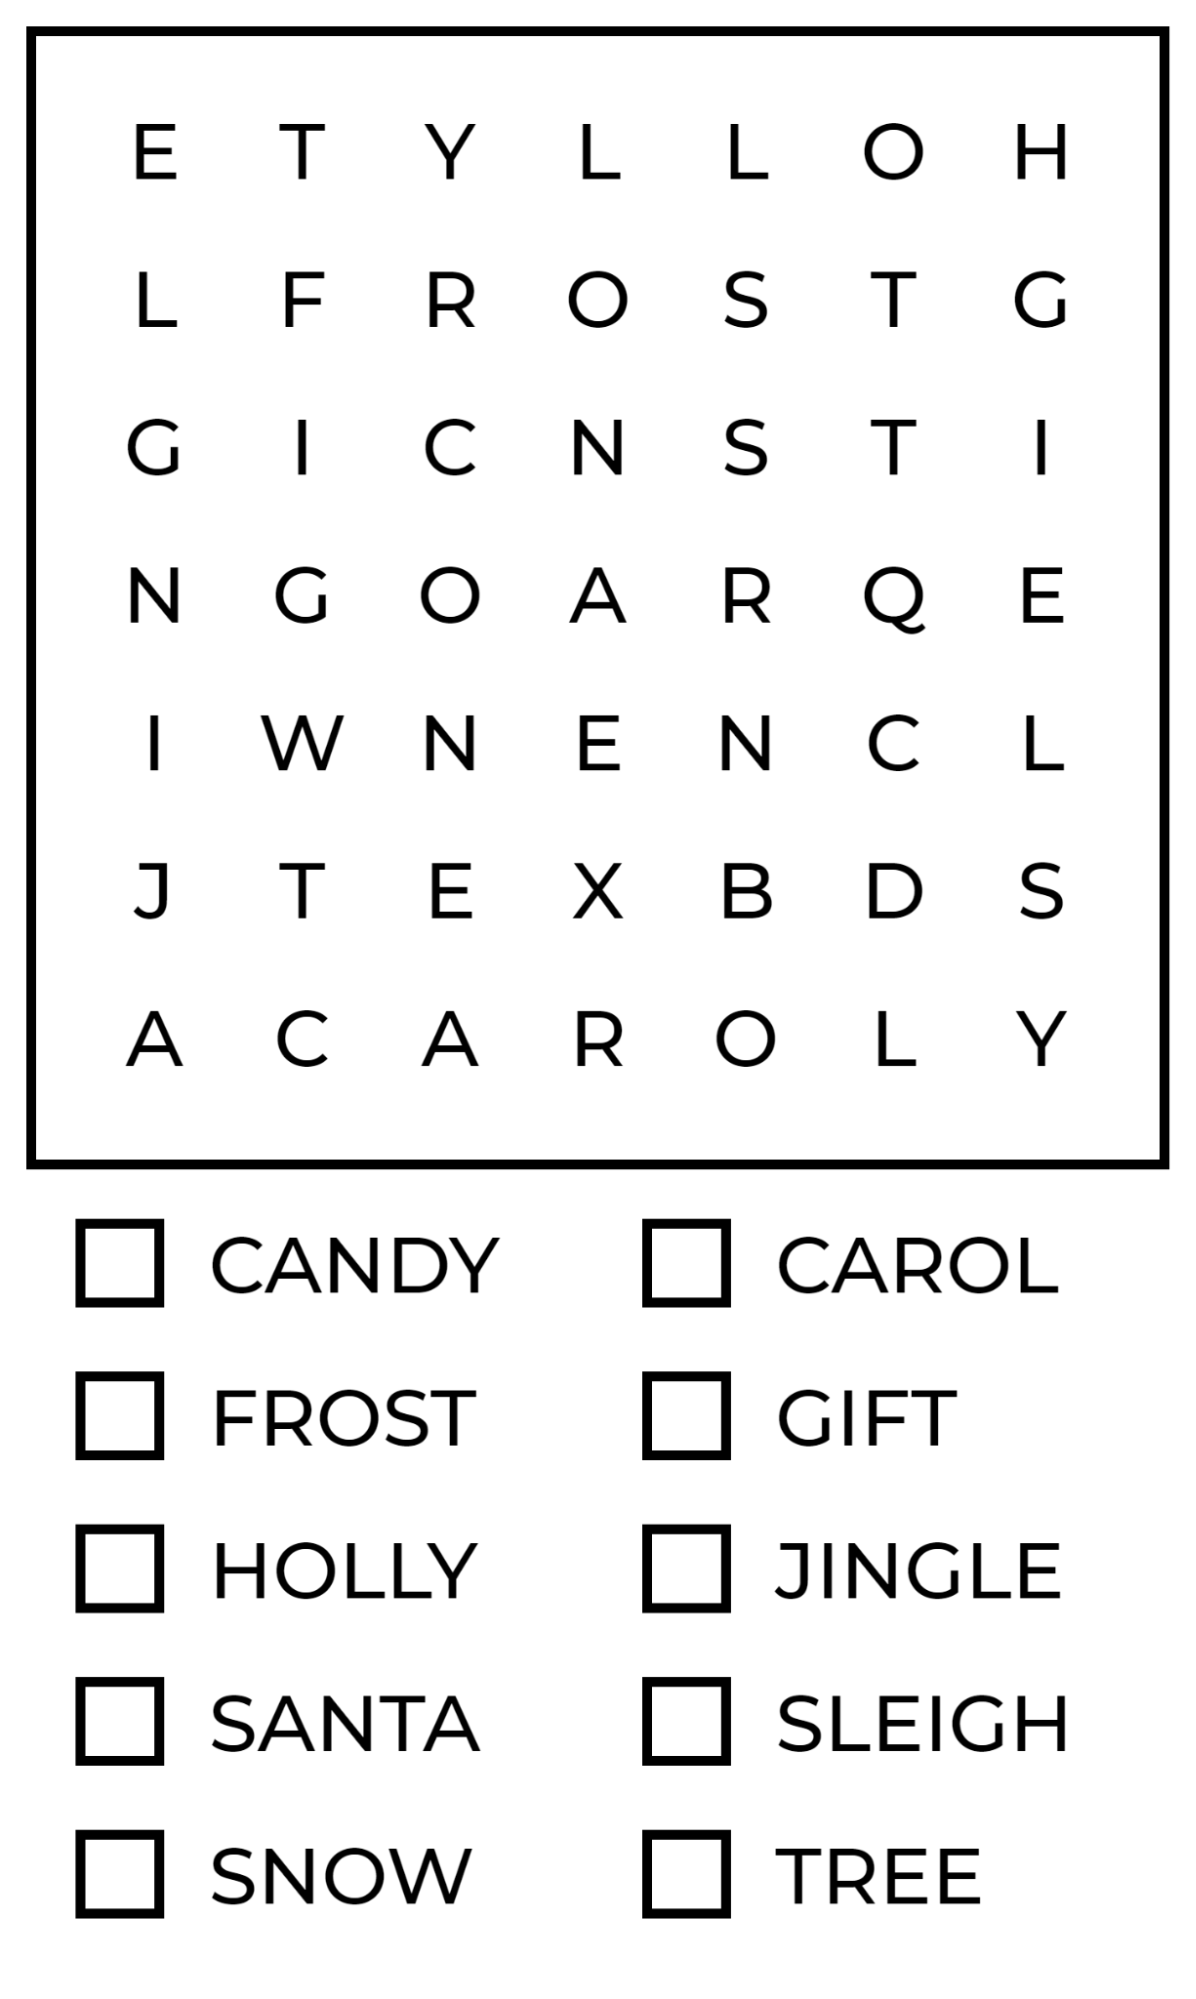 Festive Jingles Word Search Puzzles